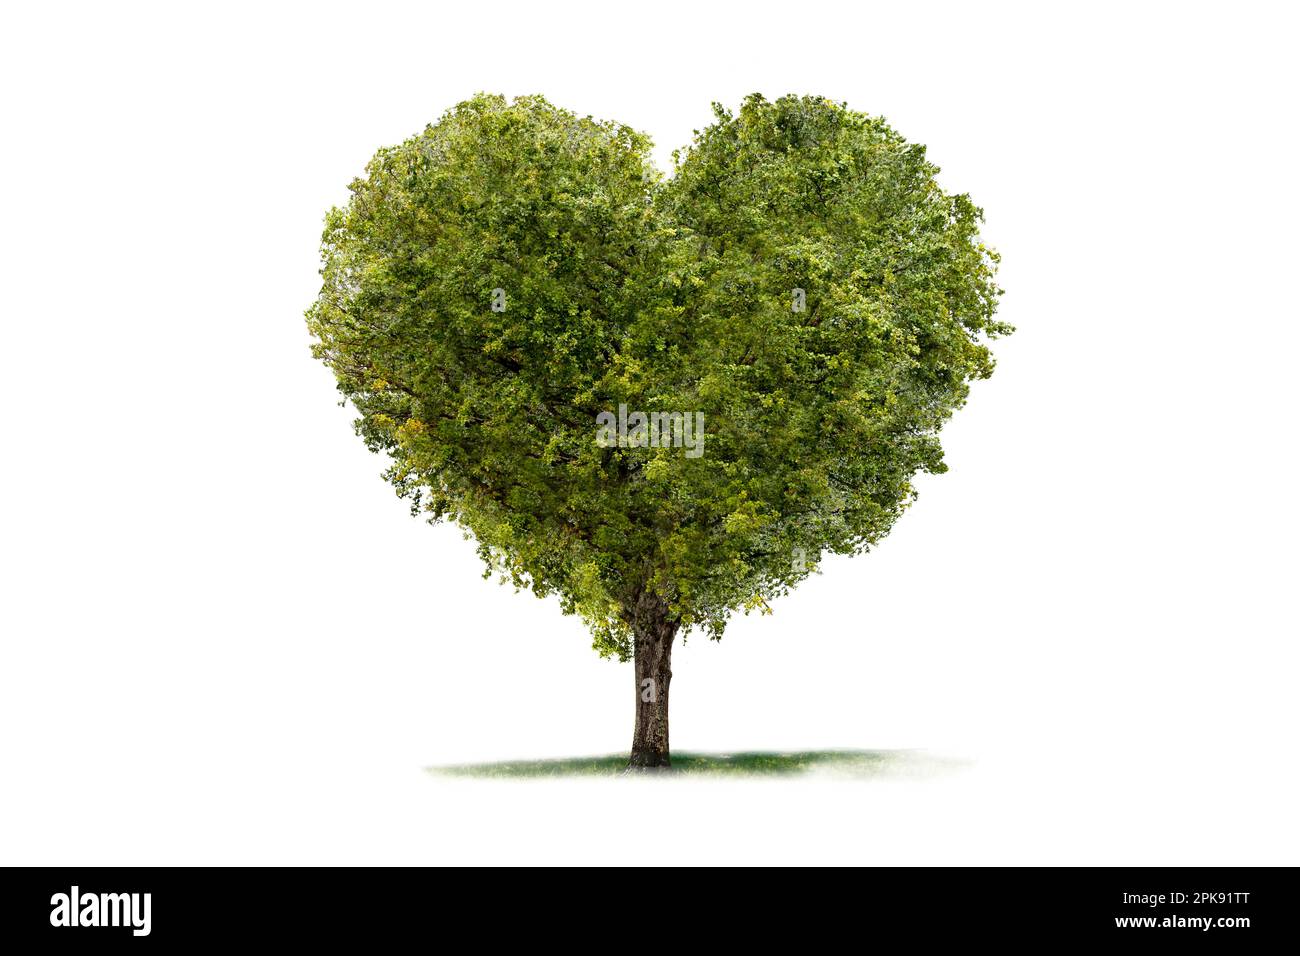 Green tree in heart shape isolated against white background [M]. Stock Photo